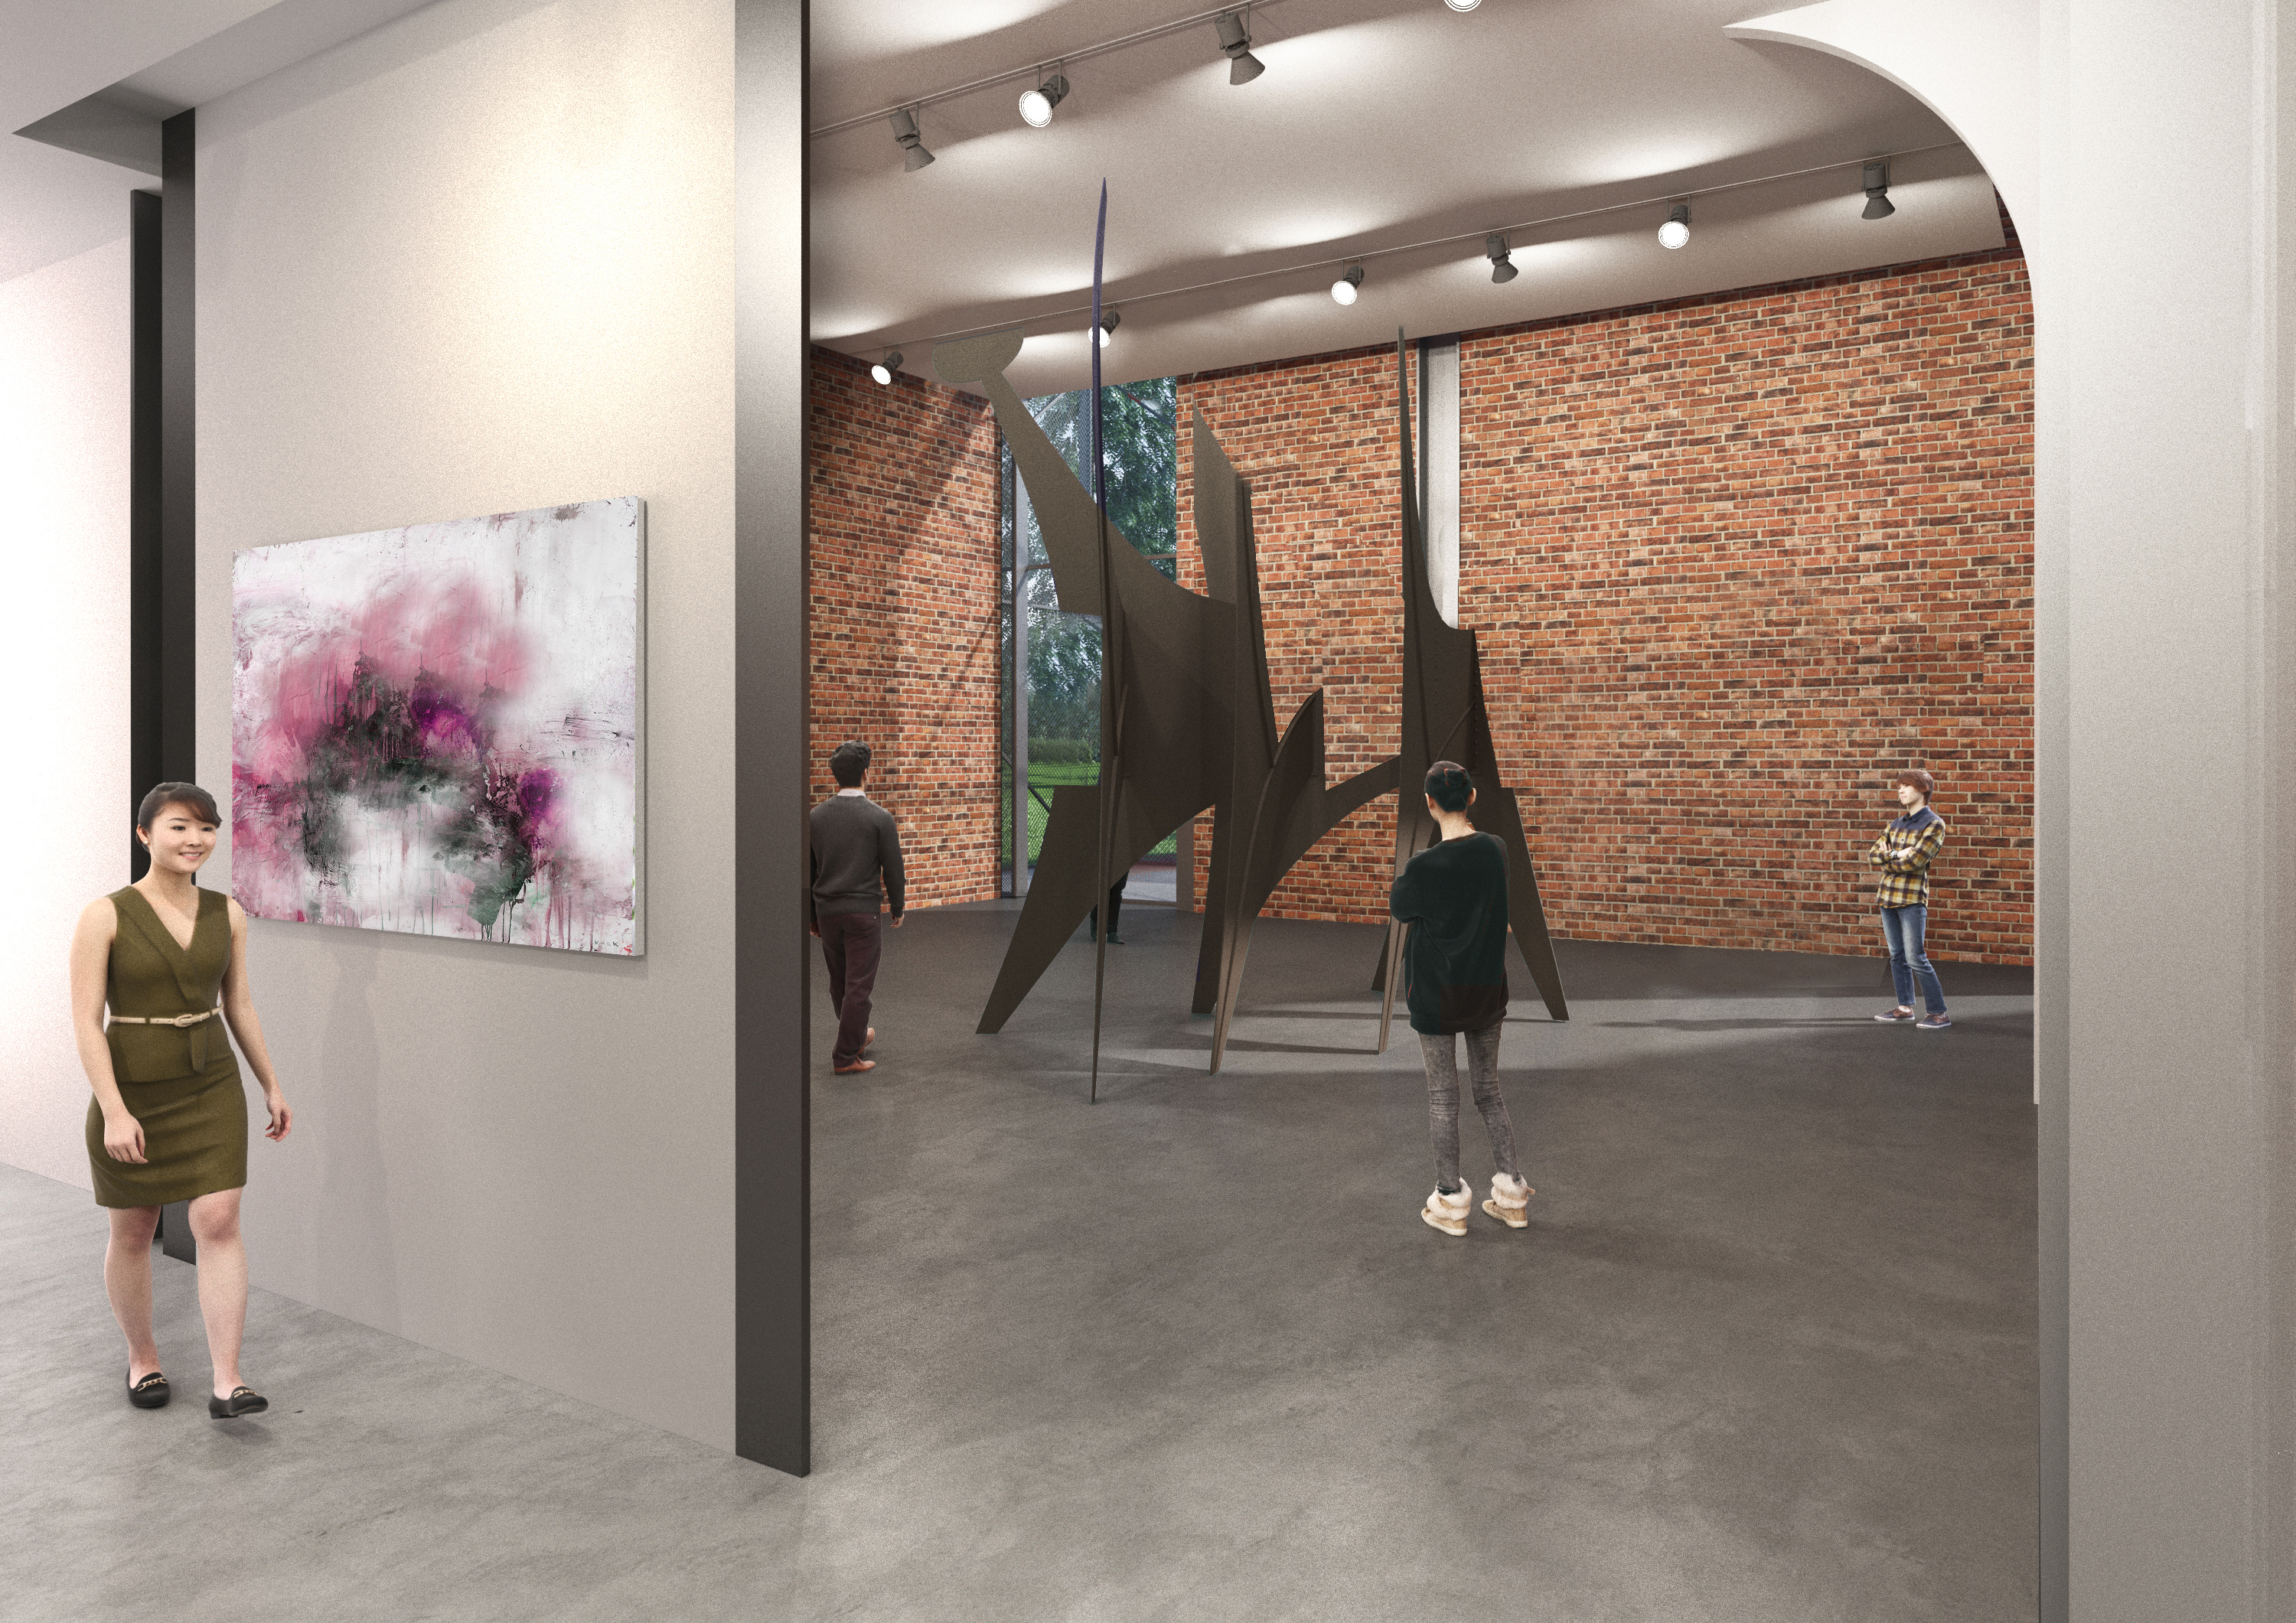 Artvest Co-Founders To Launch Concept Exhibition Space at Former